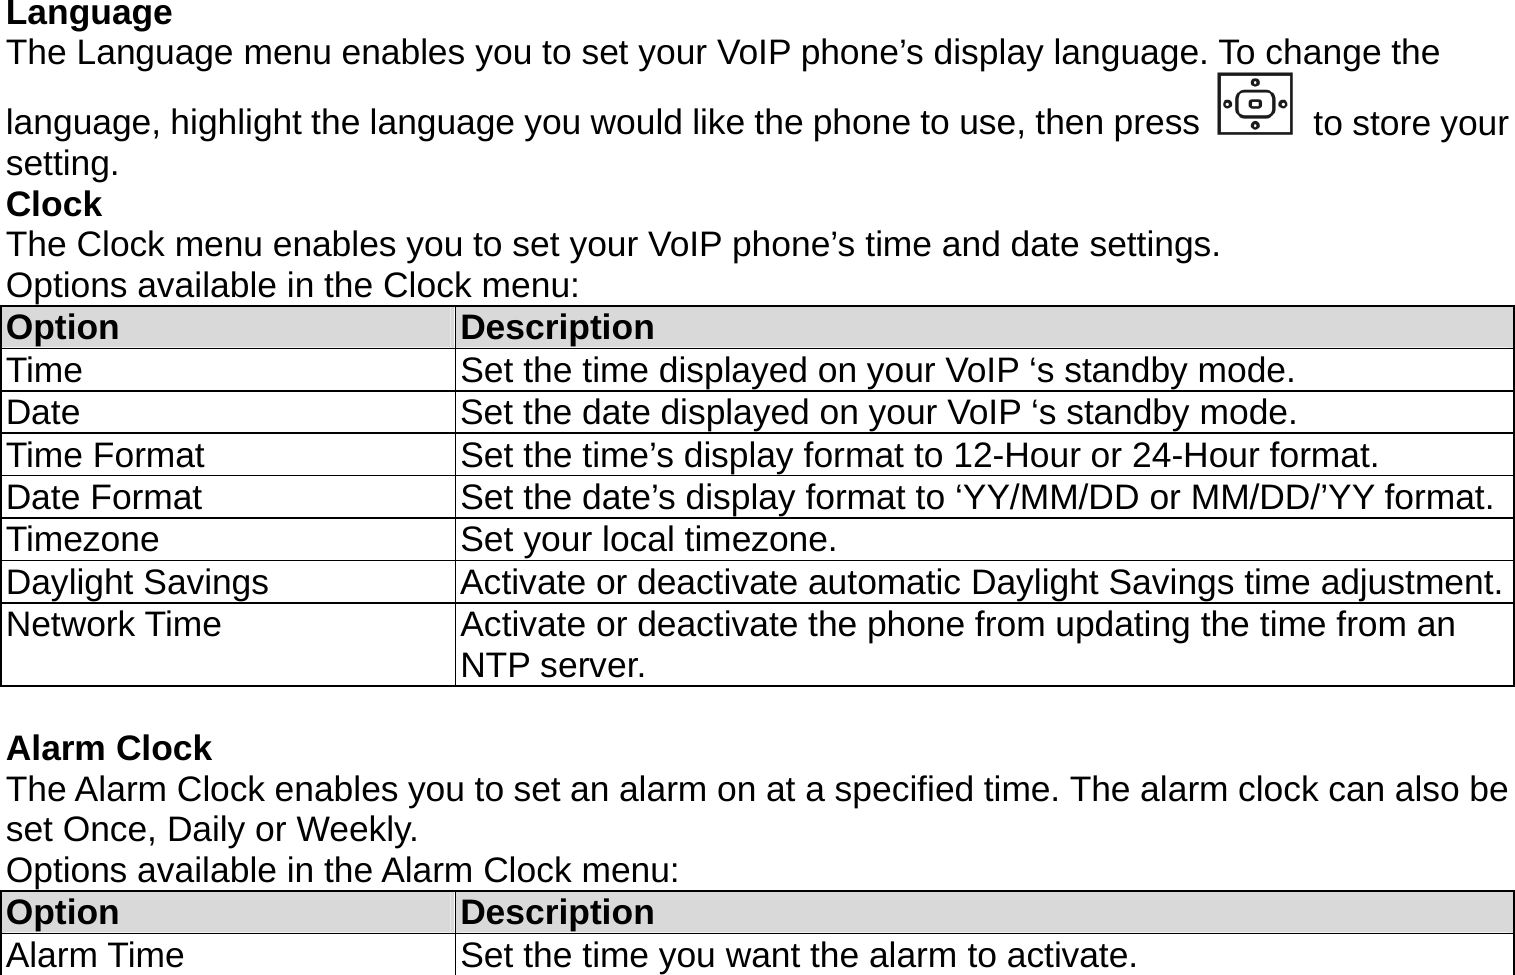 Language The Language menu enables you to set your VoIP phone’s display language. To change the language, highlight the language you would like the phone to use, then press   to store your setting. Clock The Clock menu enables you to set your VoIP phone’s time and date settings. Options available in the Clock menu: Option  Description Time  Set the time displayed on your VoIP ‘s standby mode. Date  Set the date displayed on your VoIP ‘s standby mode. Time Format  Set the time’s display format to 12-Hour or 24-Hour format. Date Format  Set the date’s display format to ‘YY/MM/DD or MM/DD/’YY format.Timezone  Set your local timezone. Daylight Savings  Activate or deactivate automatic Daylight Savings time adjustment.Network Time  Activate or deactivate the phone from updating the time from an NTP server.  Alarm Clock The Alarm Clock enables you to set an alarm on at a specified time. The alarm clock can also be set Once, Daily or Weekly. Options available in the Alarm Clock menu: Option  Description Alarm Time  Set the time you want the alarm to activate. 